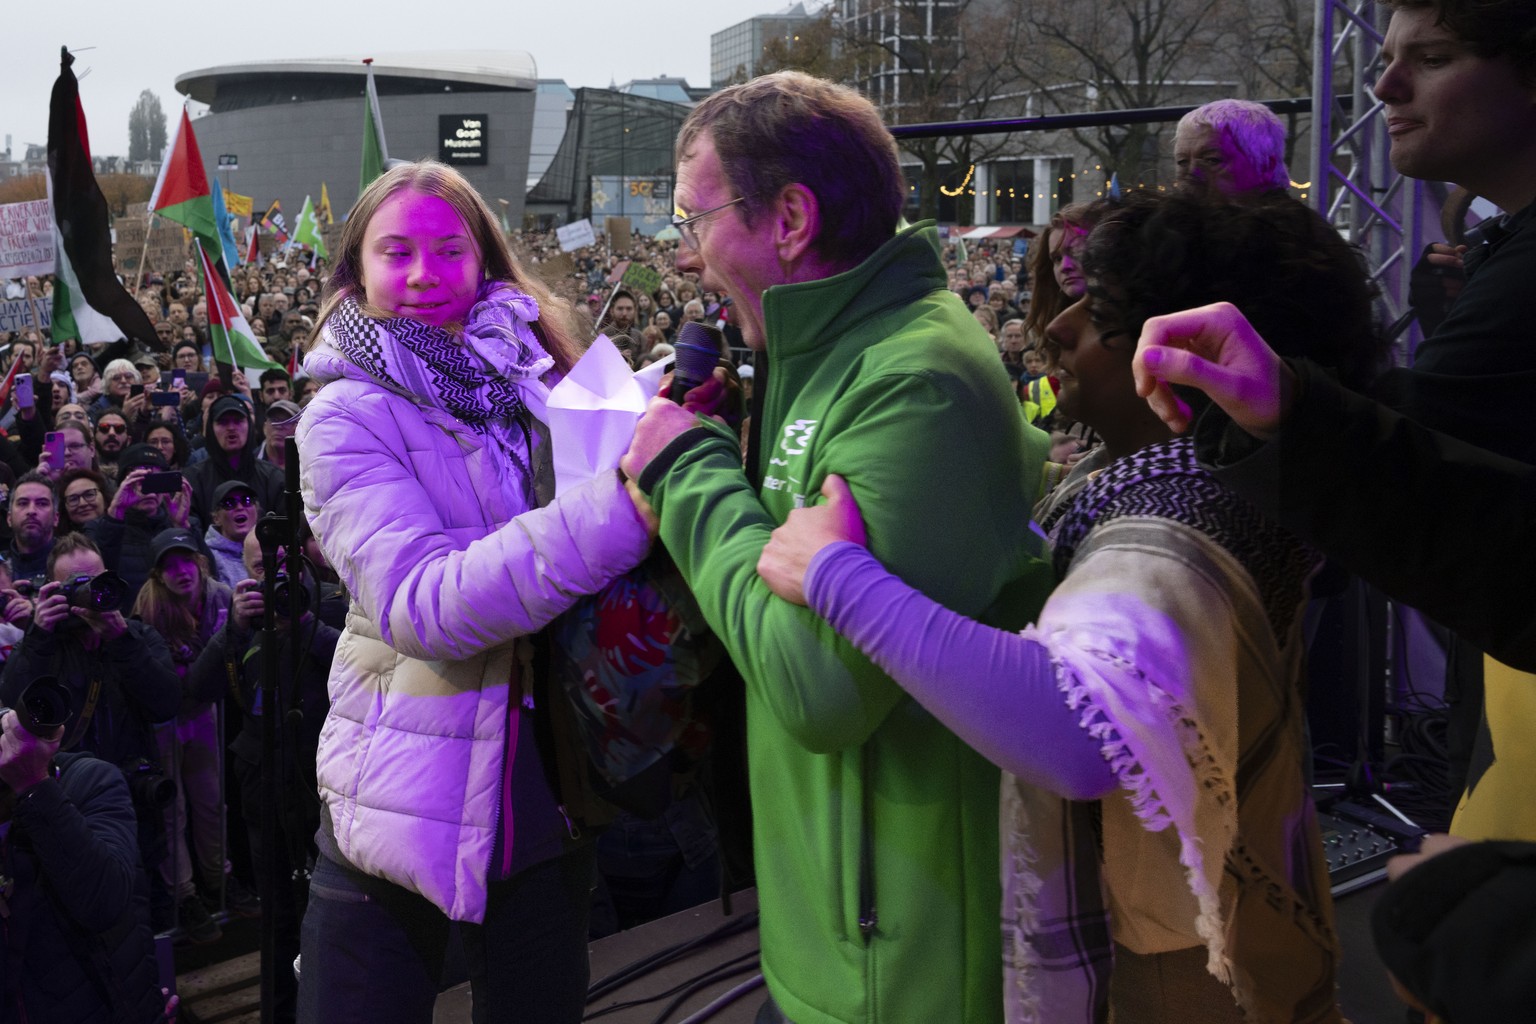 Climate activist Greta Thunberg is interrupted by a climate activist after Thunberg expressed solidarity with the Palestinians as tens of thousands of people marched through Amsterdam, Netherlands, Su ...